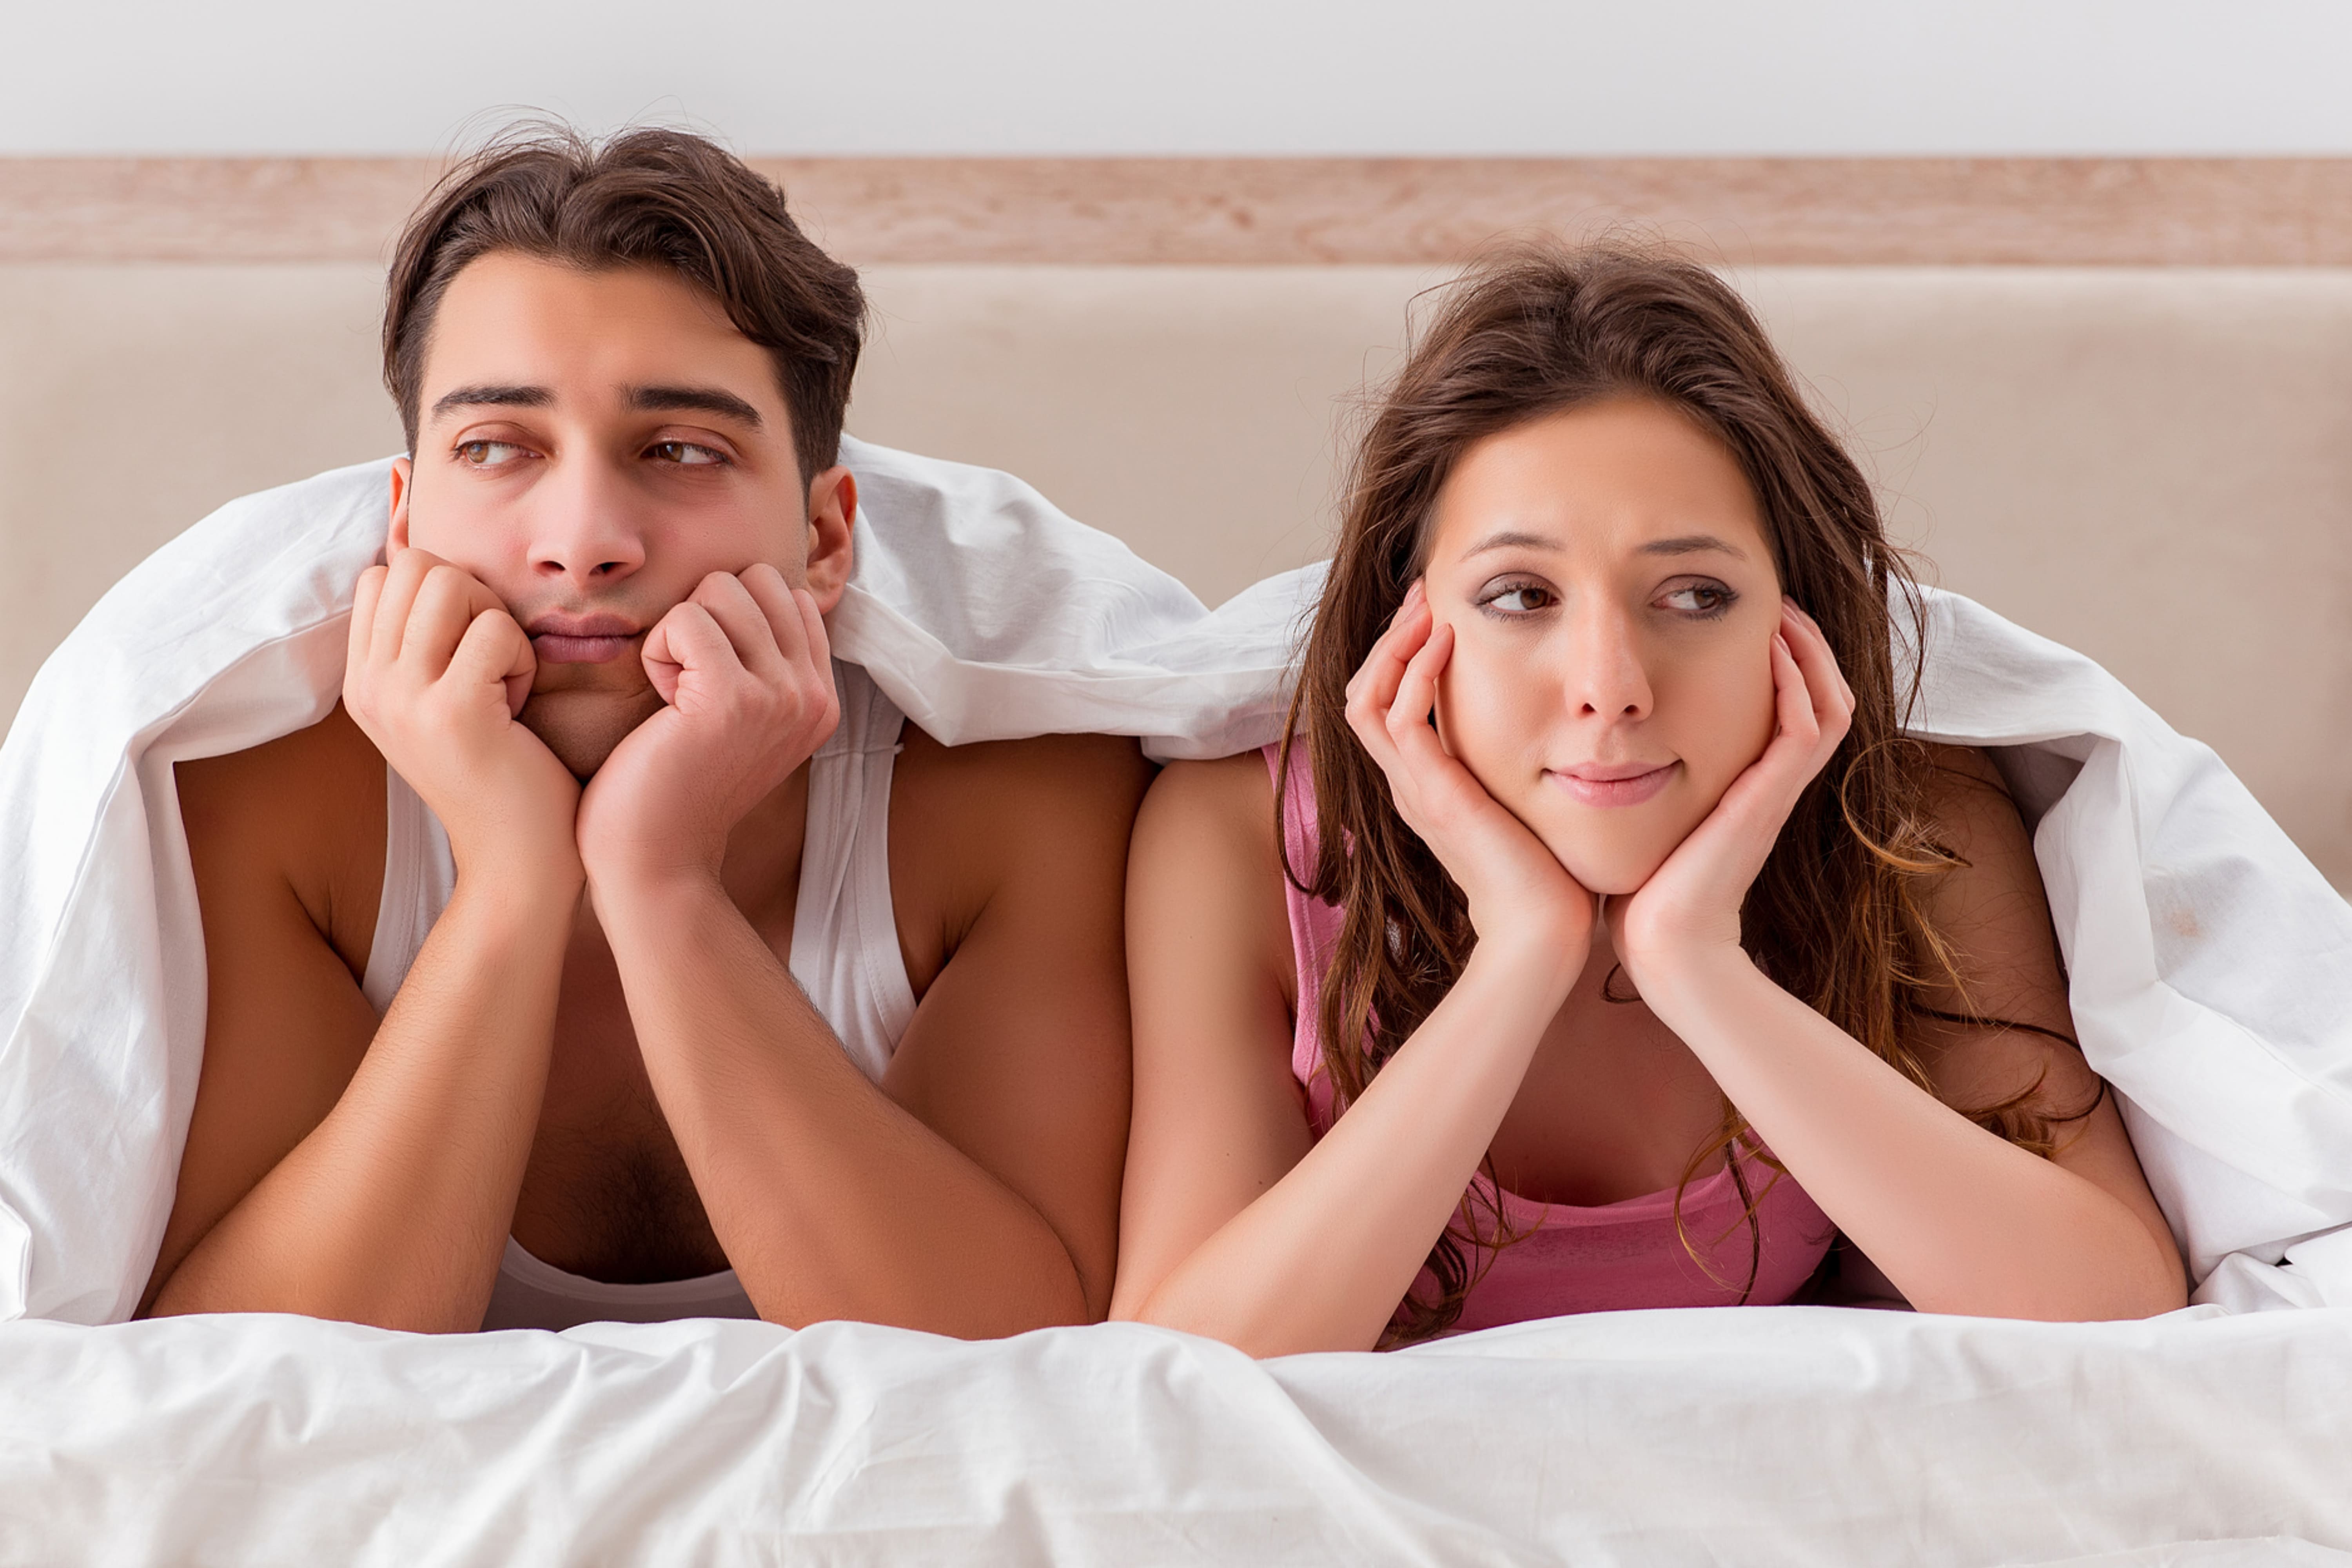 5. Men and Women Cheat for Different Reasons